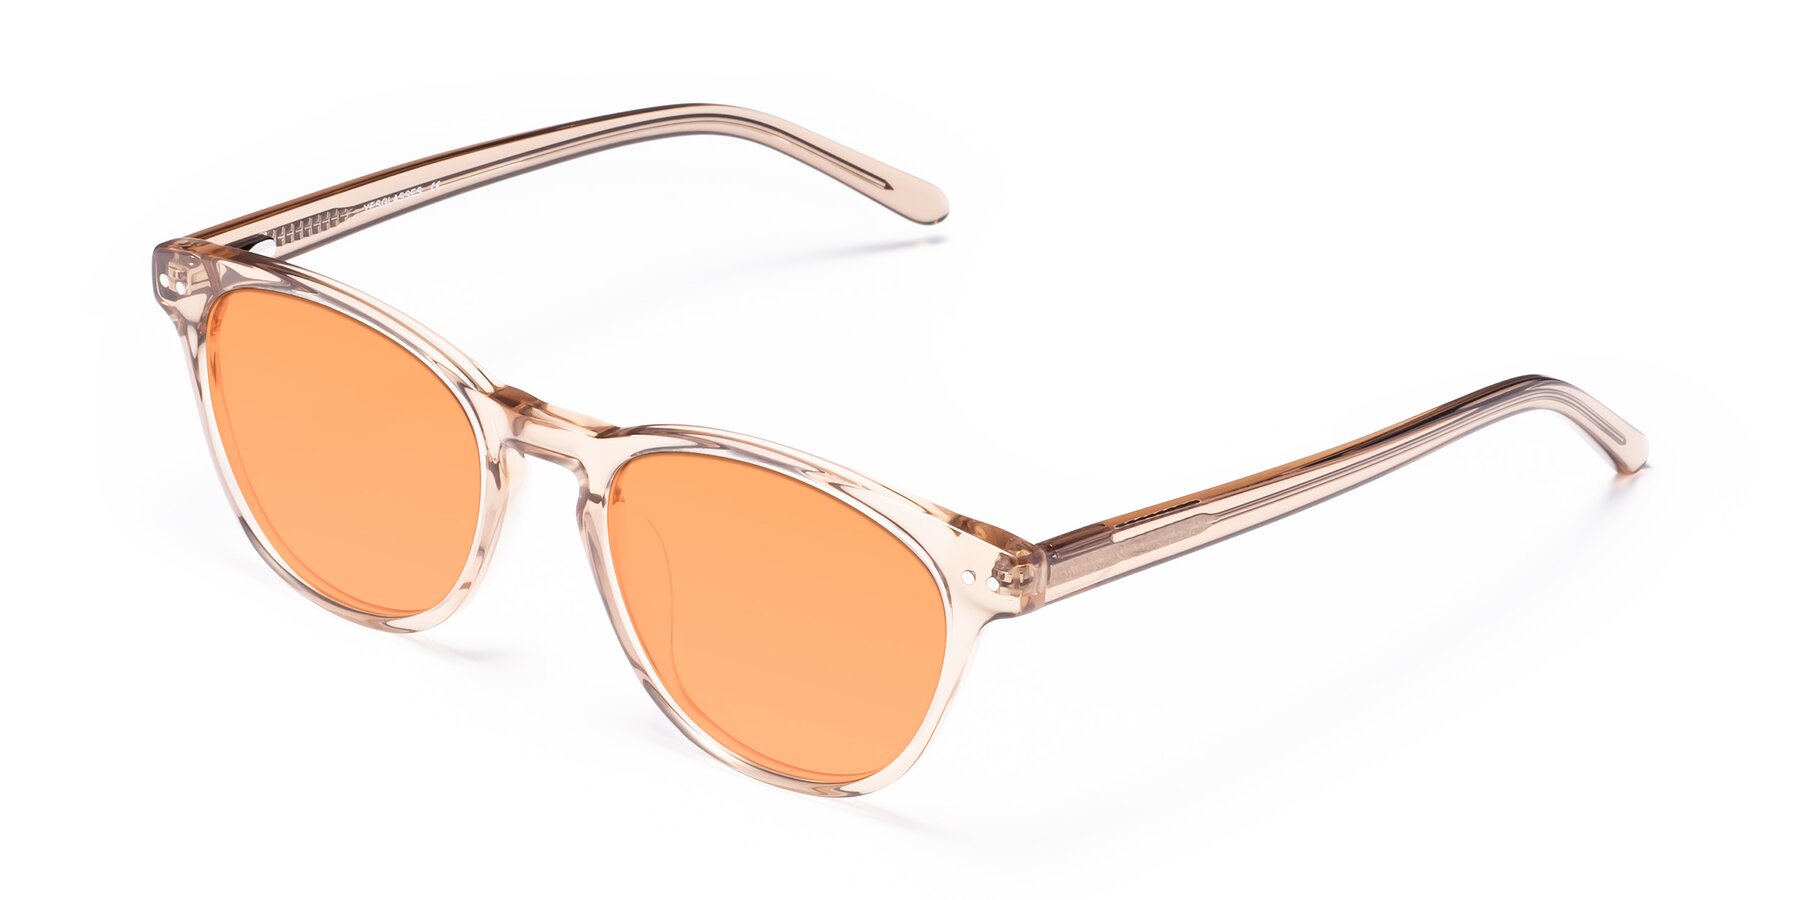 Angle of Blaze in light Brown with Medium Orange Tinted Lenses